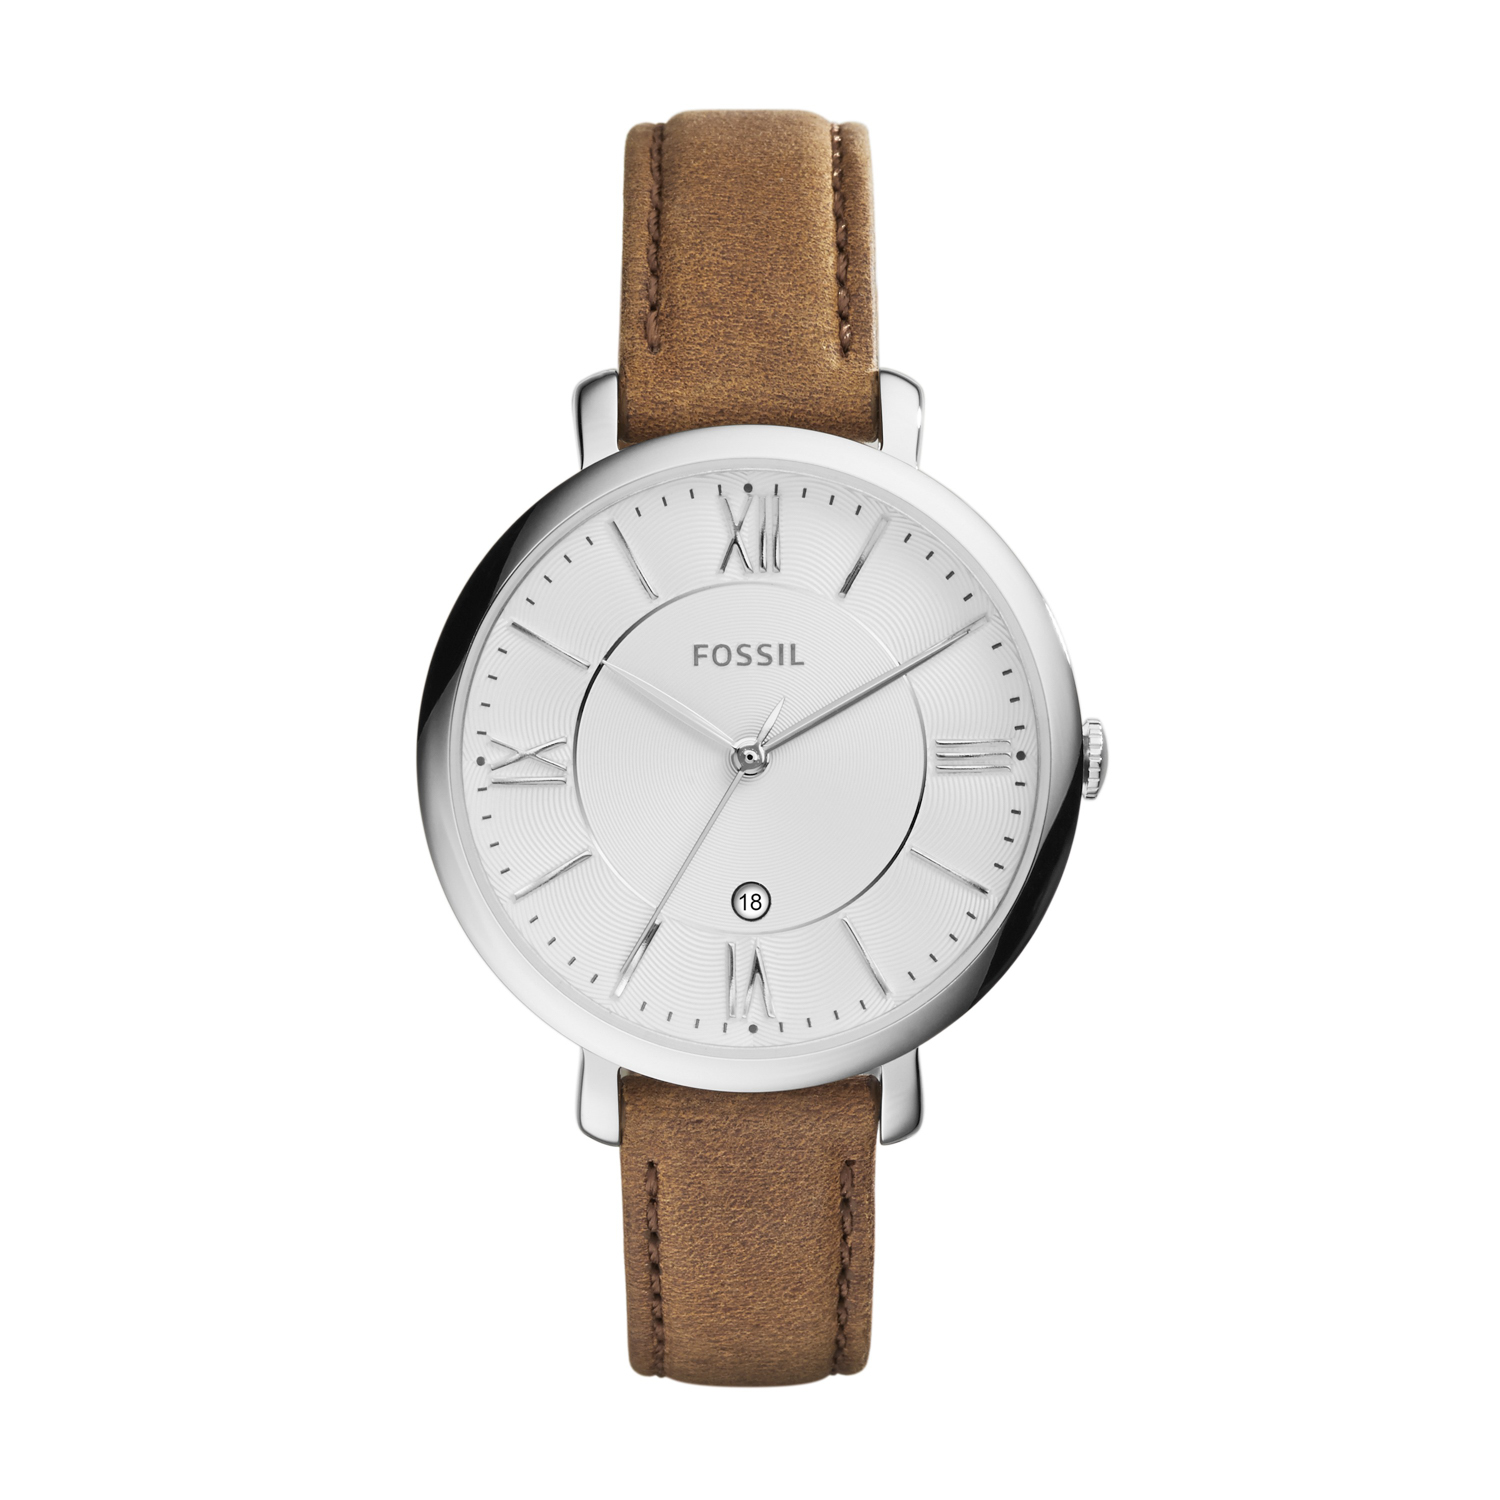 Fossil Jacqueline Brown Strap Watch